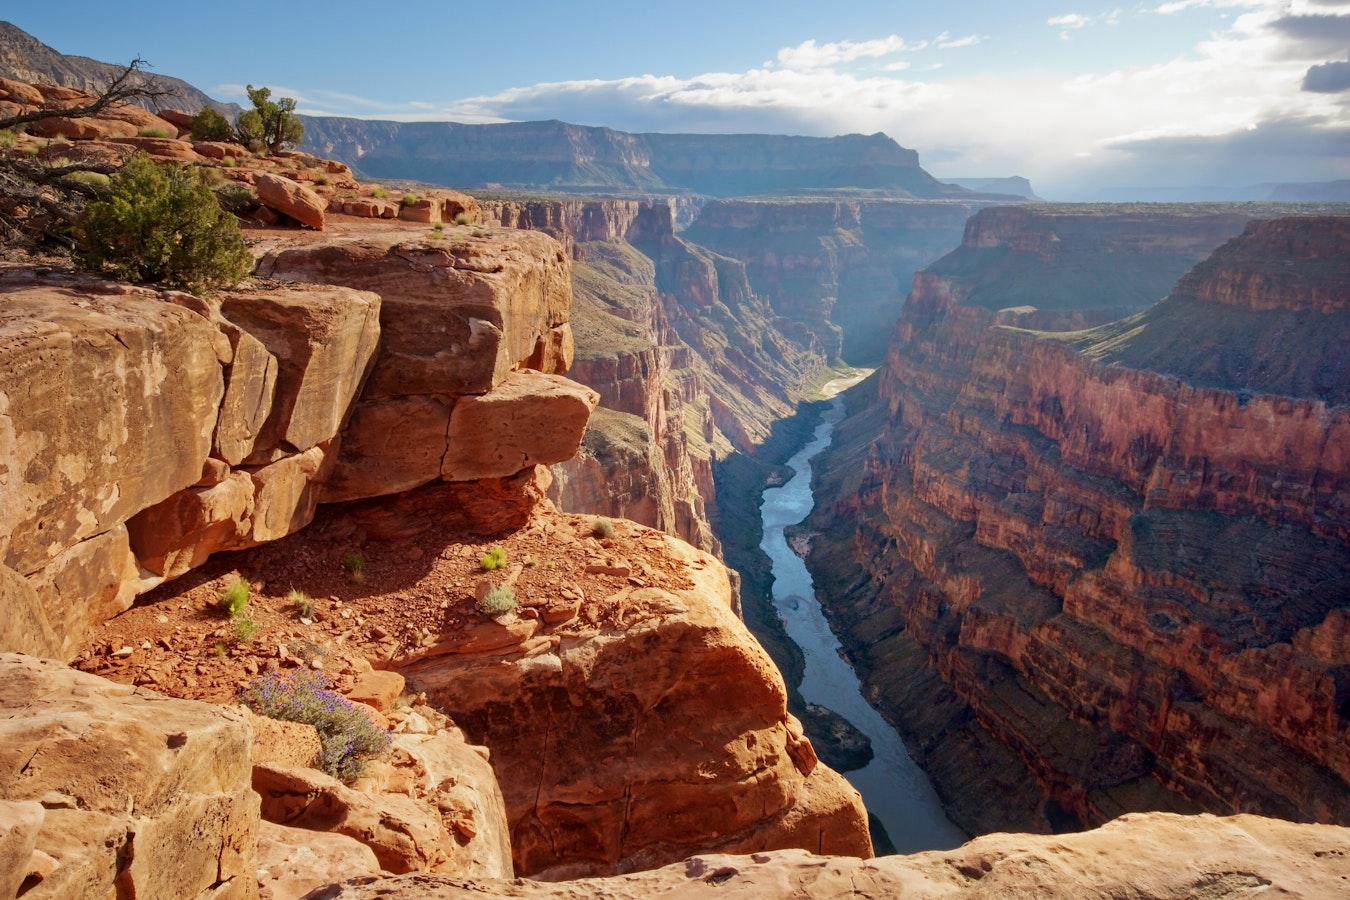 What is 5 facts about the Grand Canyon?